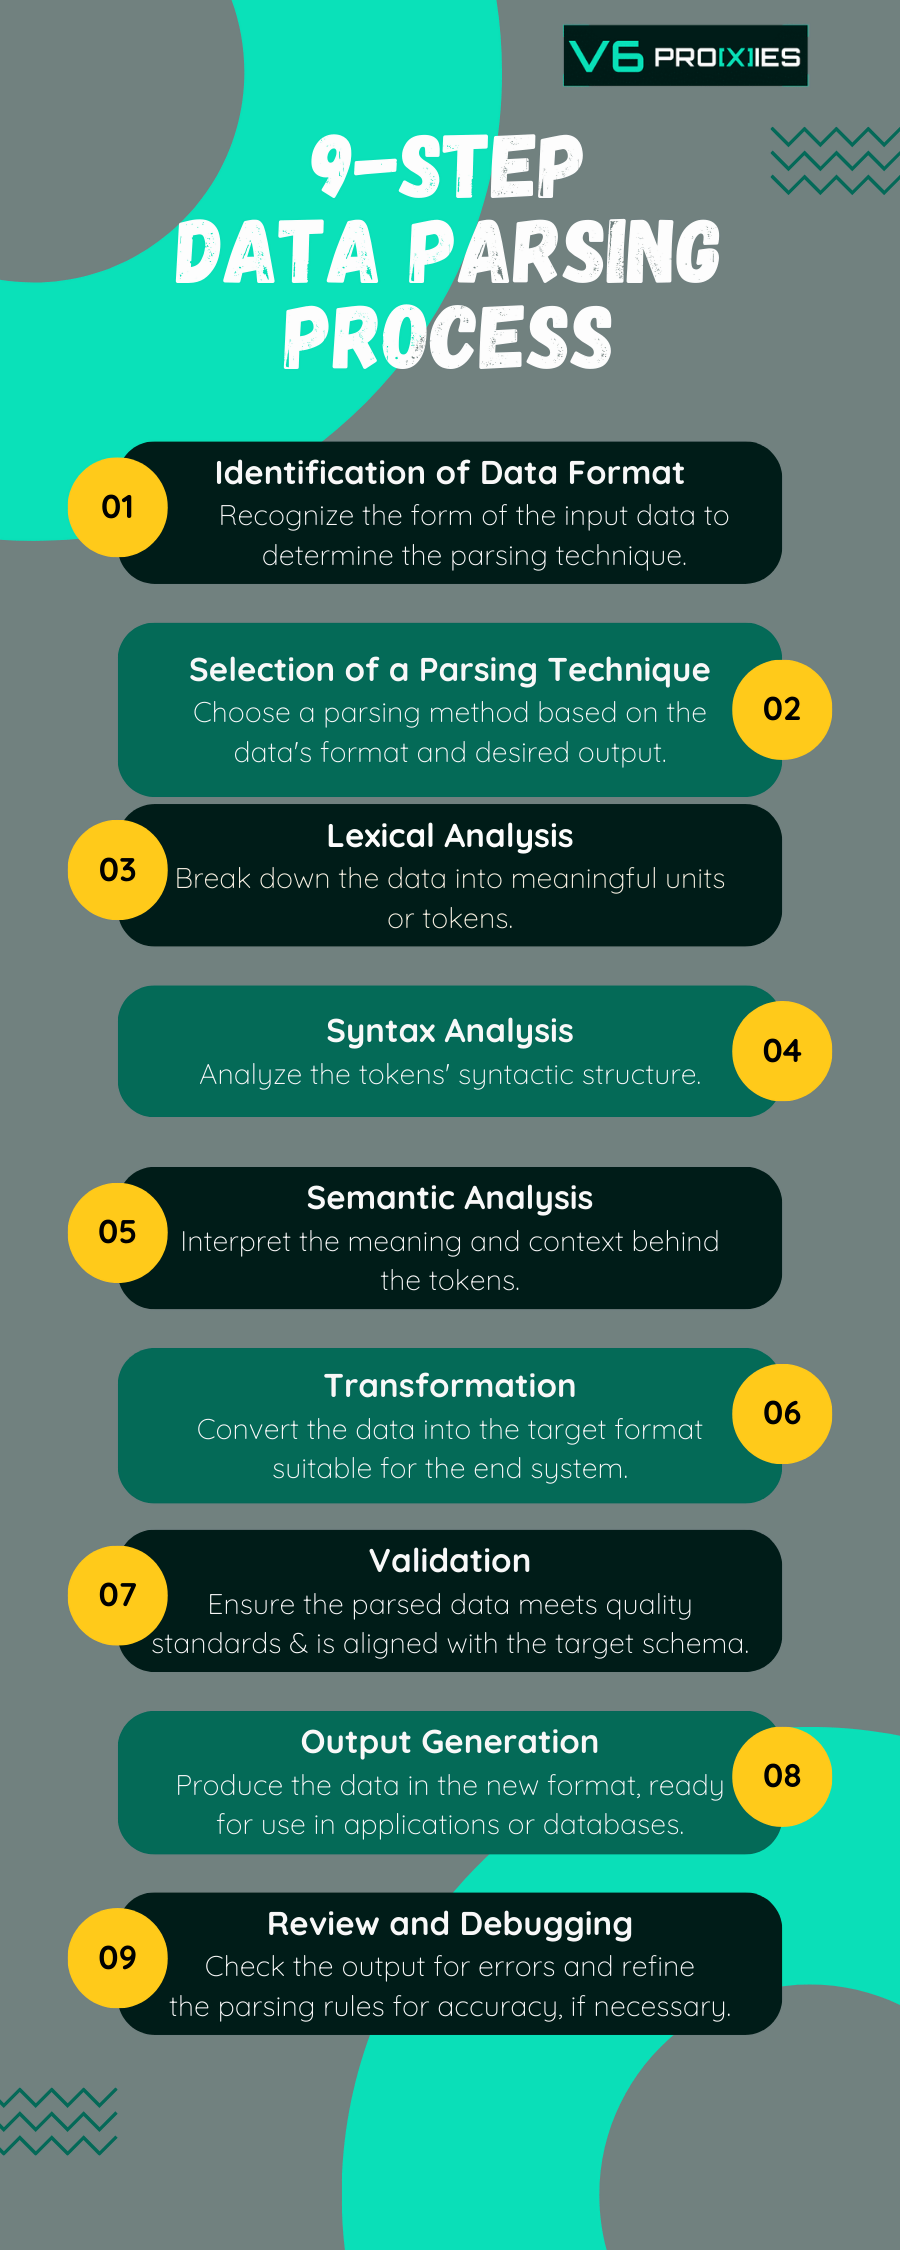 The image is an infographic titled "9-Step Data Parsing Process," presented on a vertical banner with a teal and dark grey color scheme.